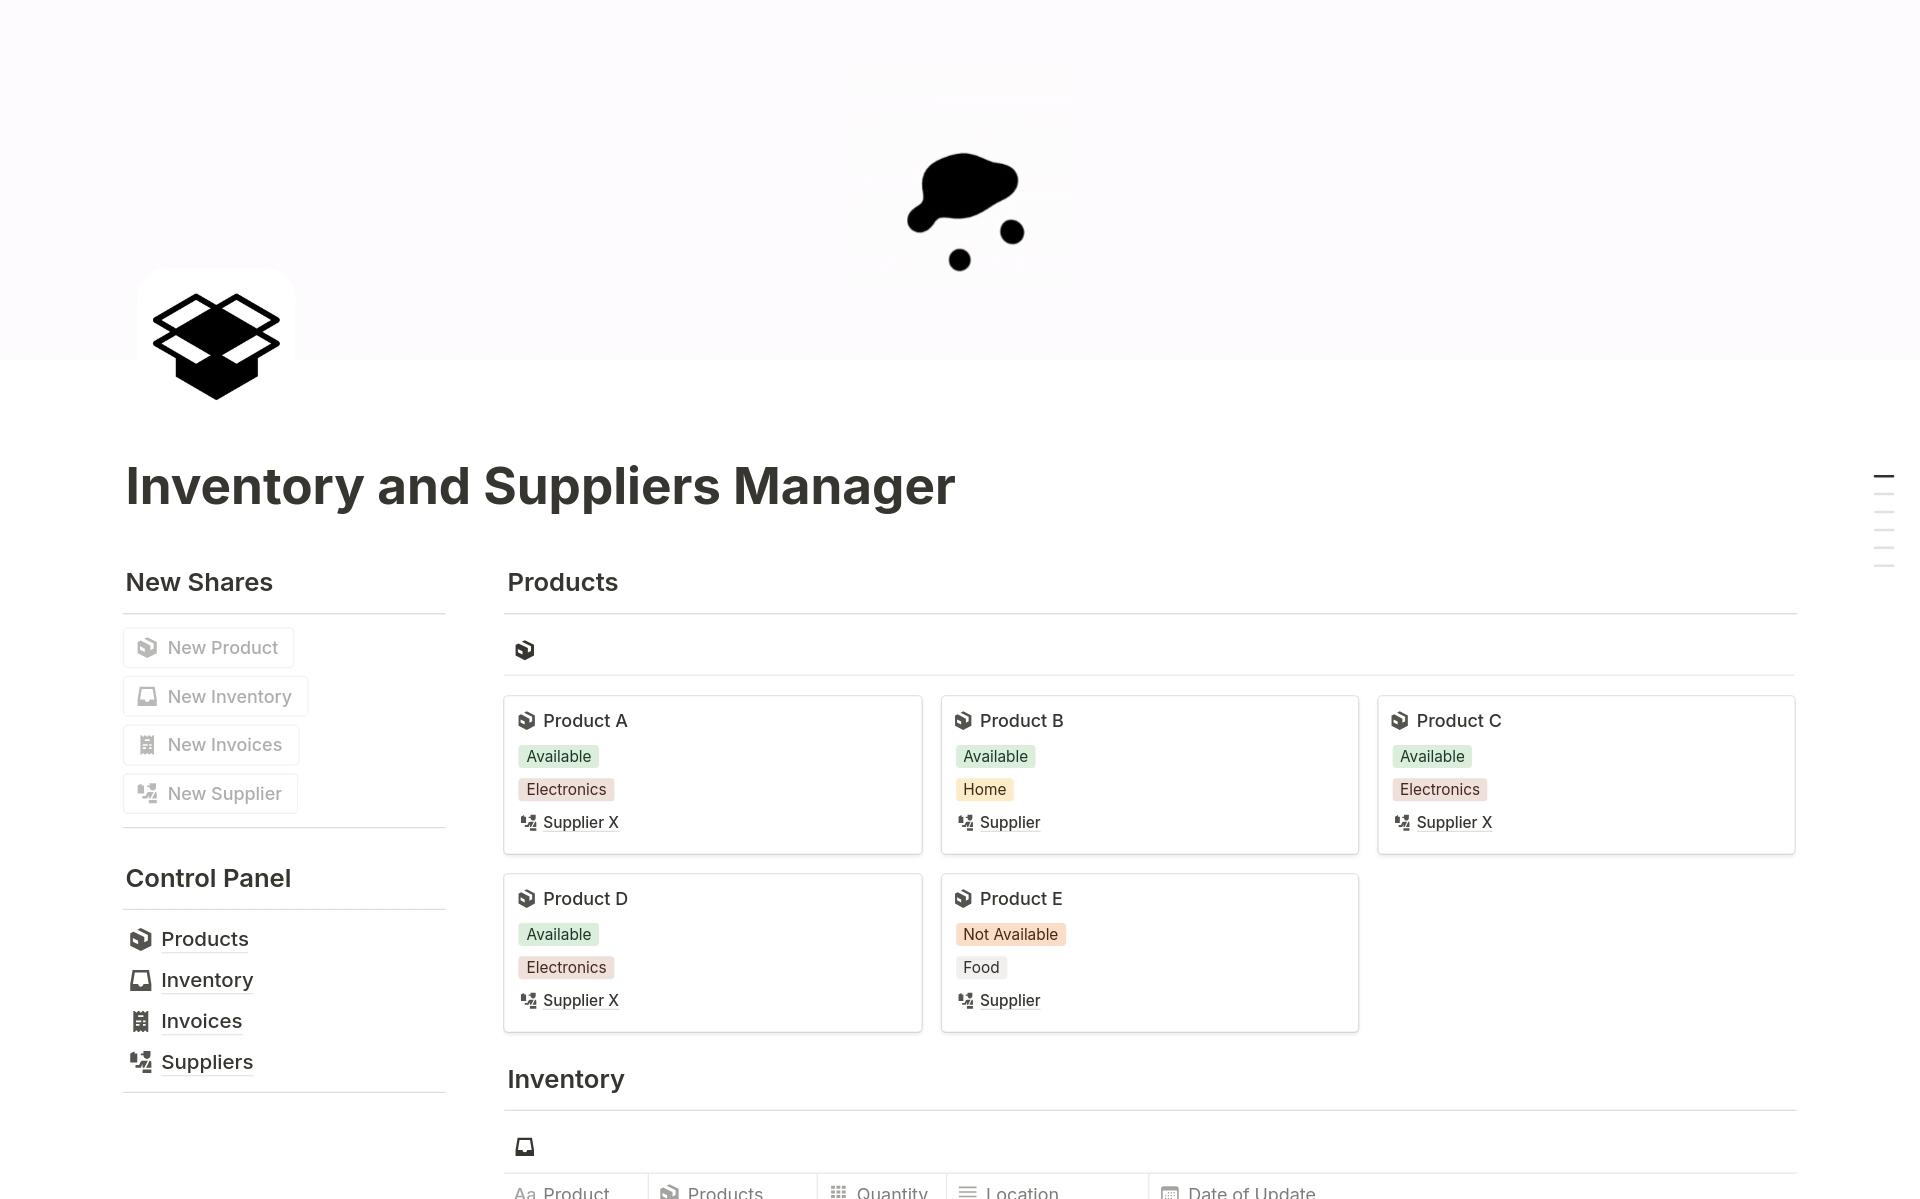 Inventory and Suppliers Managerのテンプレートのプレビュー